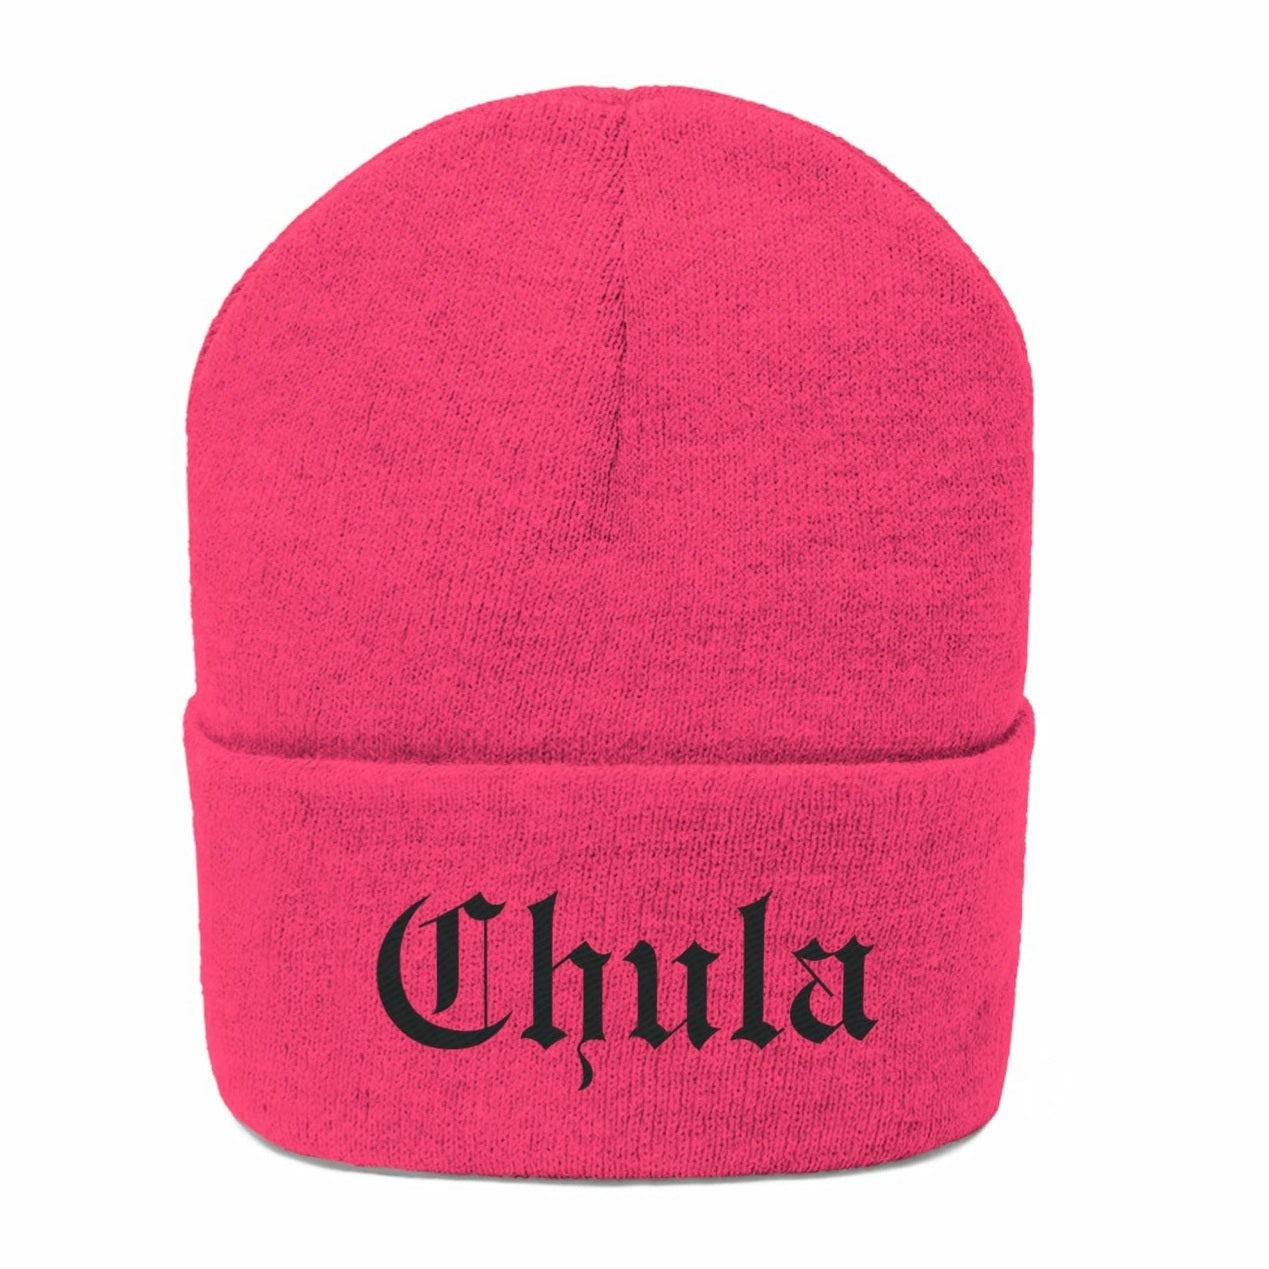 Neon pink knit beanie hat for Hispanic women and Spanish speakers. The world "Chula" is embroidered in black old English style lettering